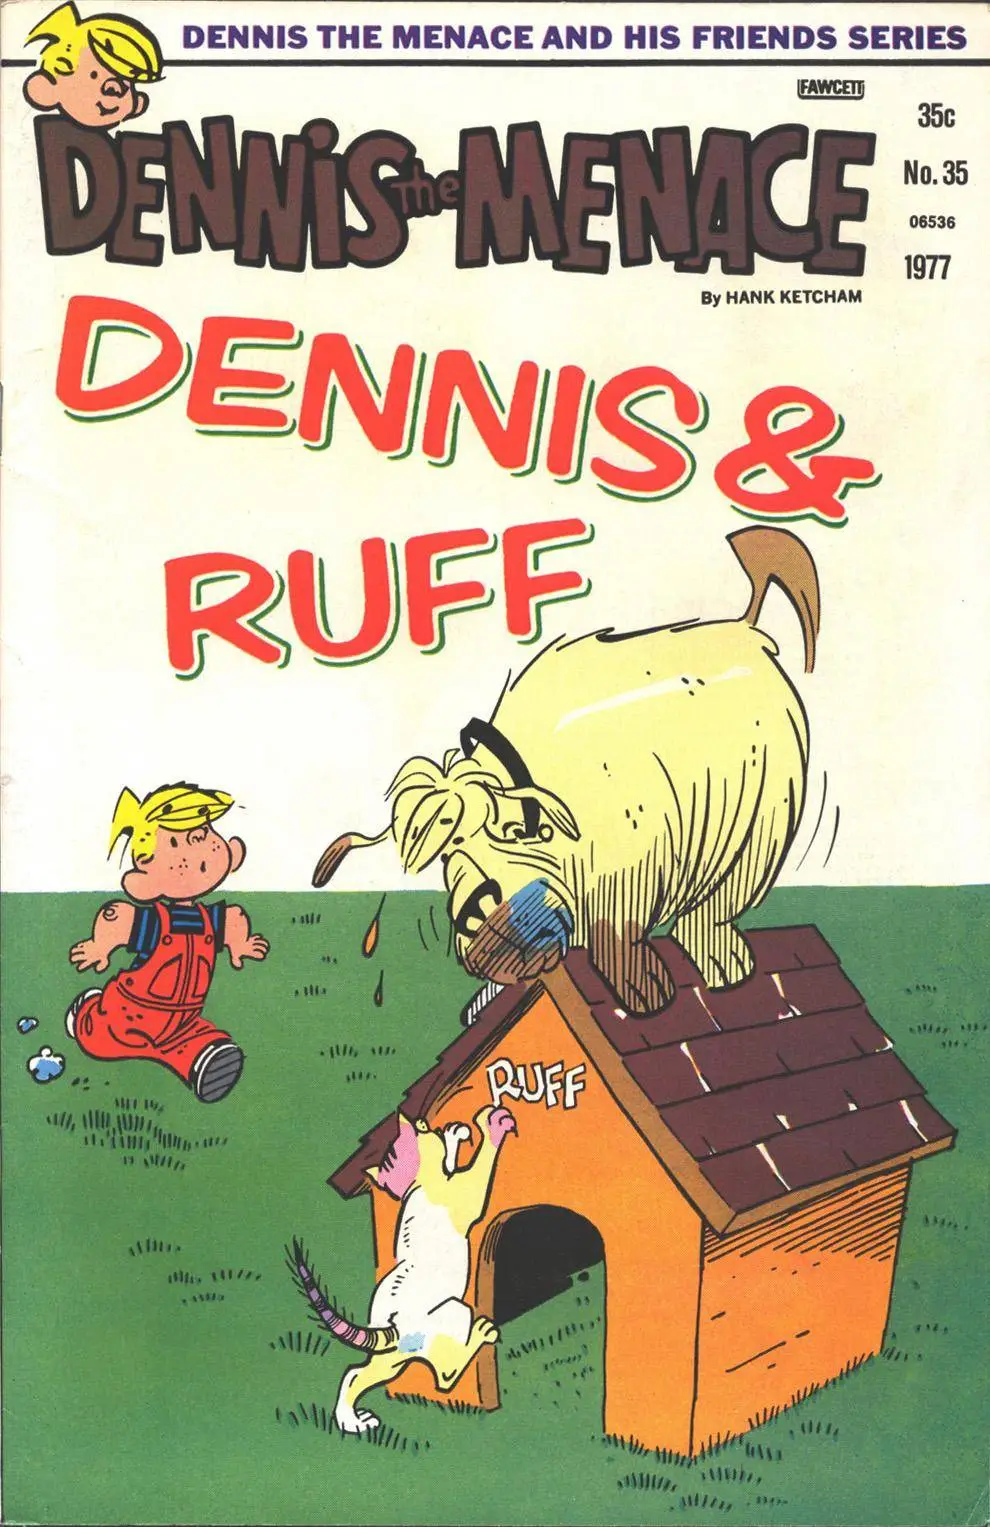 Dennis the Menace Misc 20 of 30Dennis the Menace and His Friends 1977...